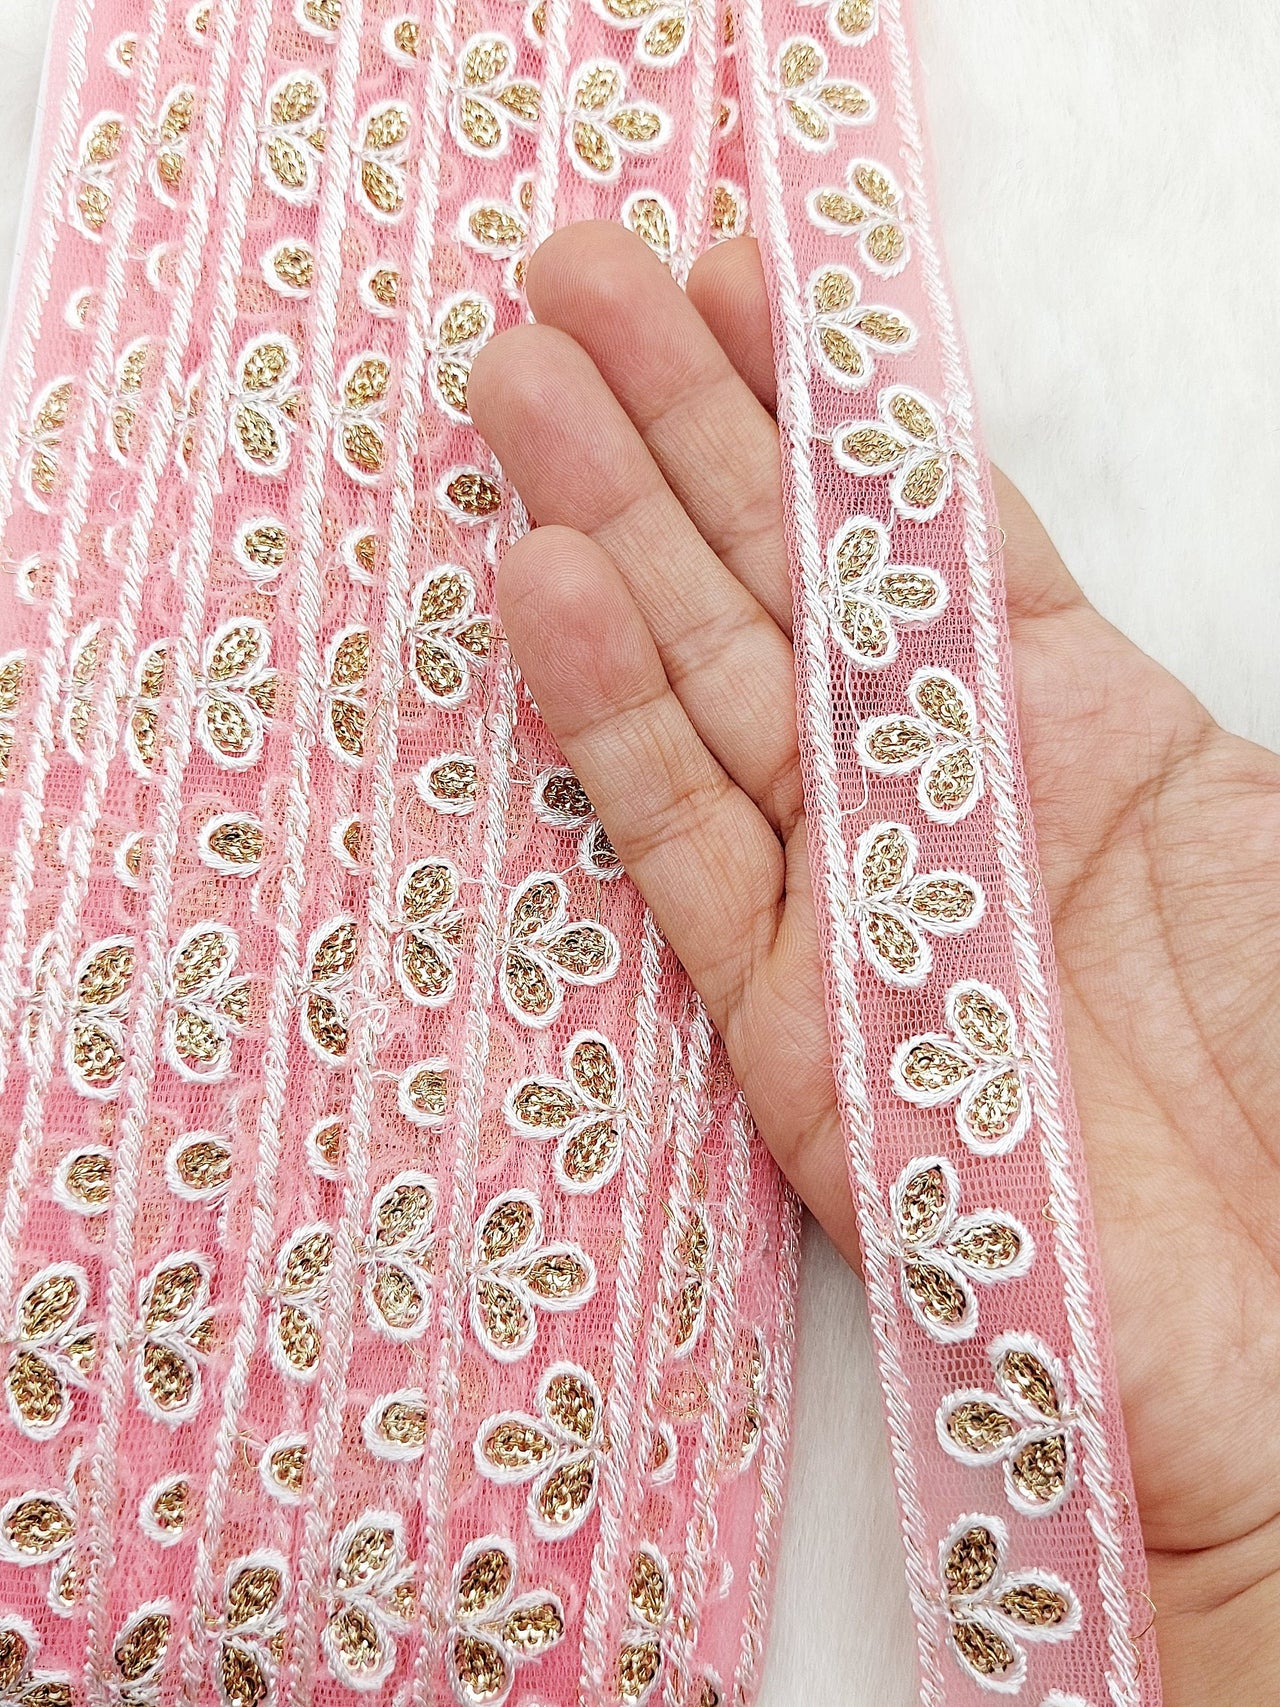 Wholesale Peach Net Lace Floral Embroidery & Glitter Gold Sequins, Indian Wedding Border, Gifting Ribbon Costume Trim Fashion Trimming